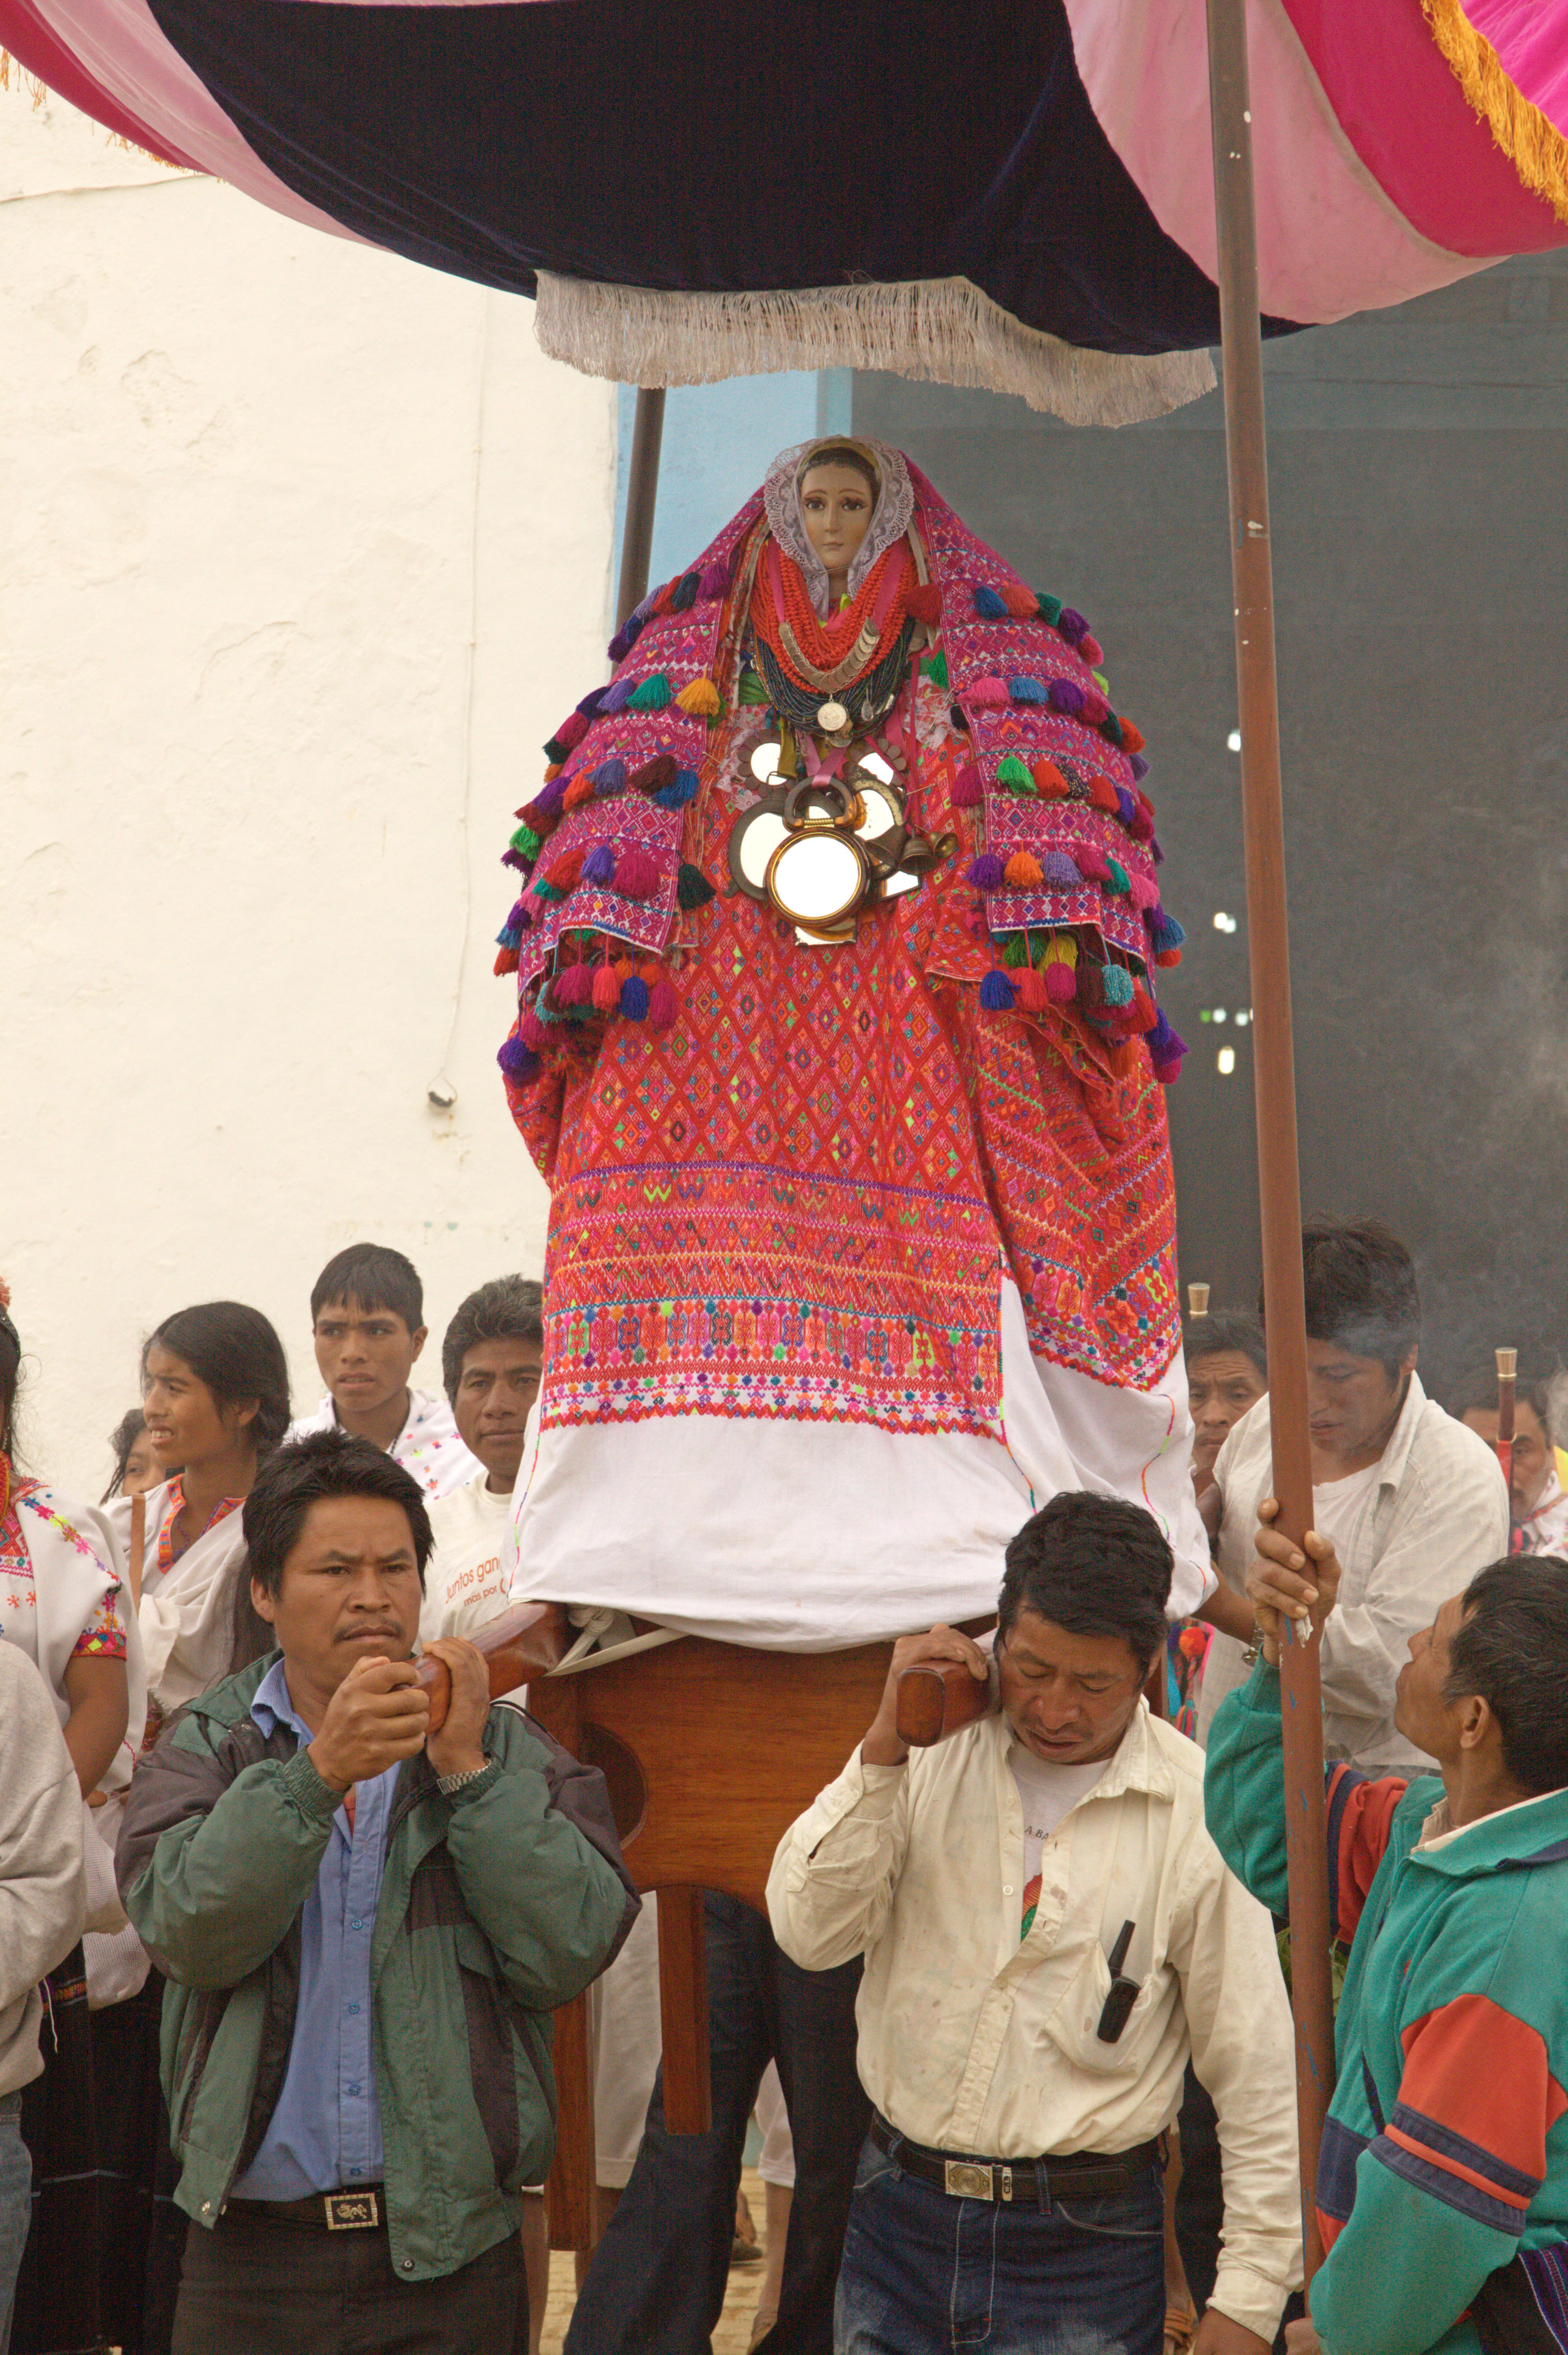 Santa María Magdalena dressed in an elaborate multicolored hand-woven huipil processed through the streets of Magdalenas by four men.